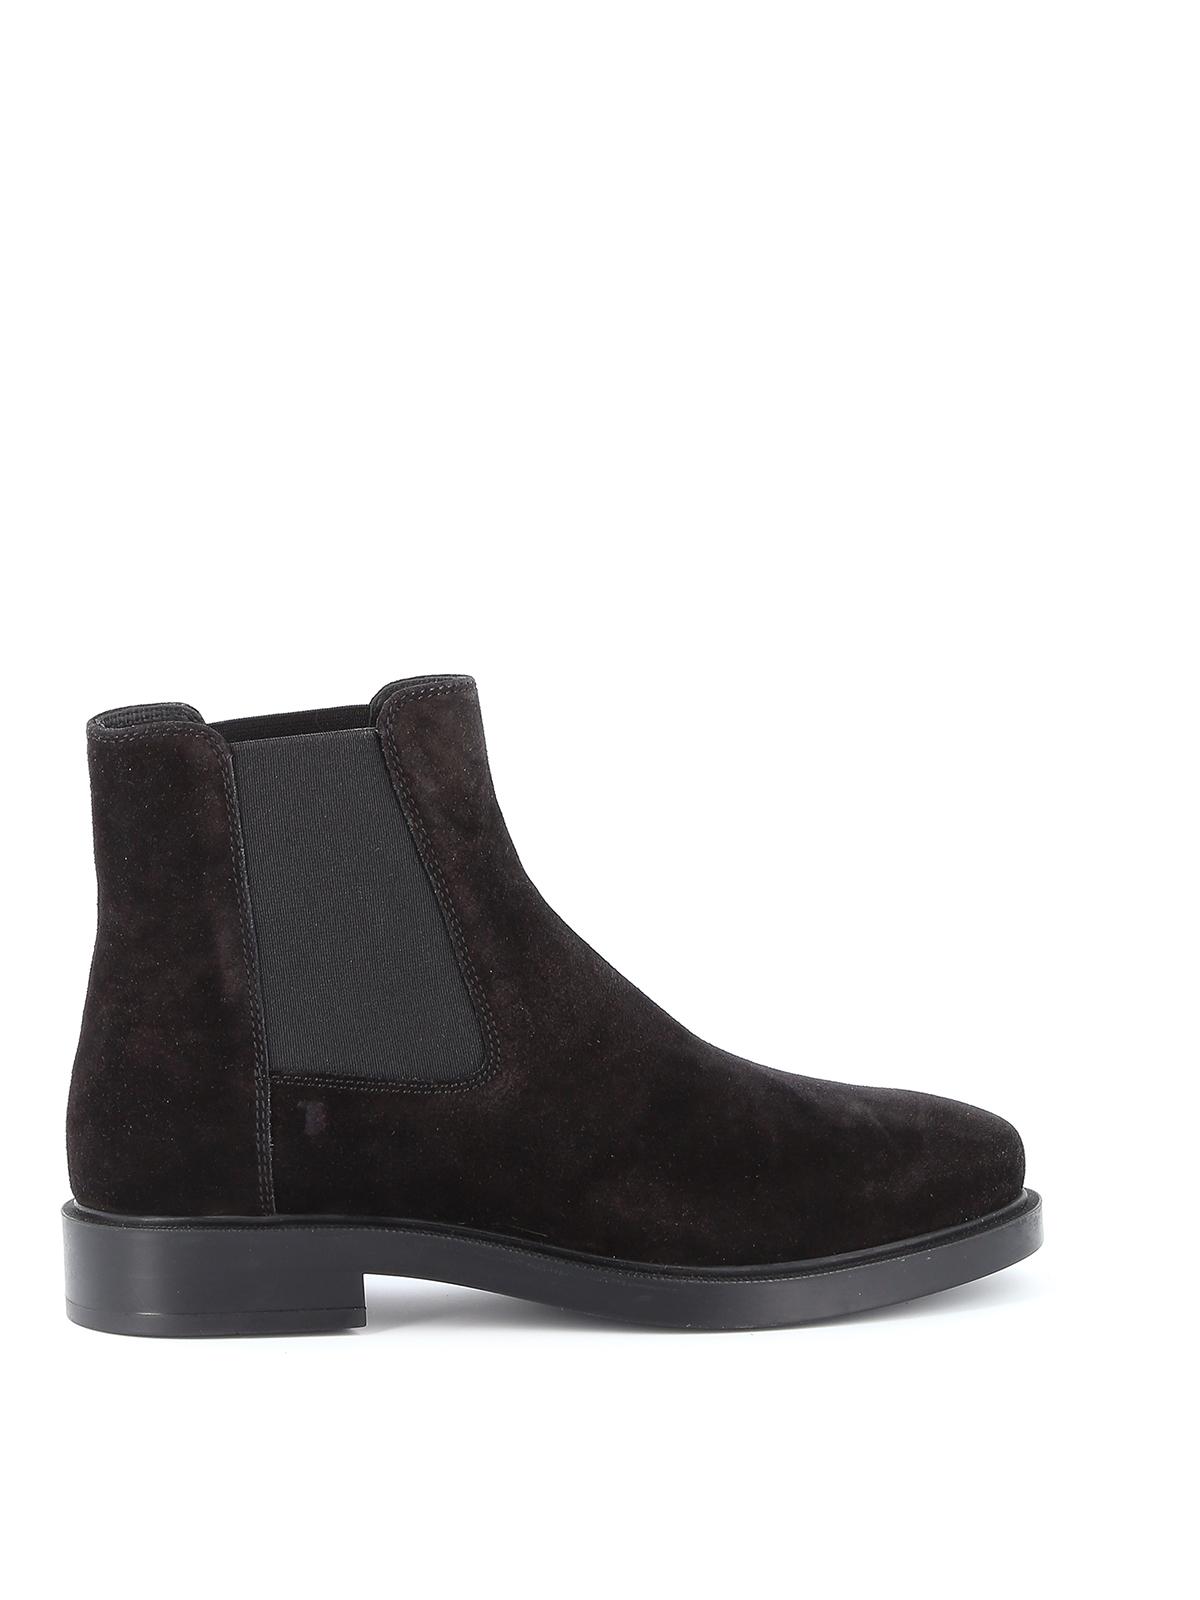 Tod's Suede Pull On Ankle Boots in Black for Men - Lyst